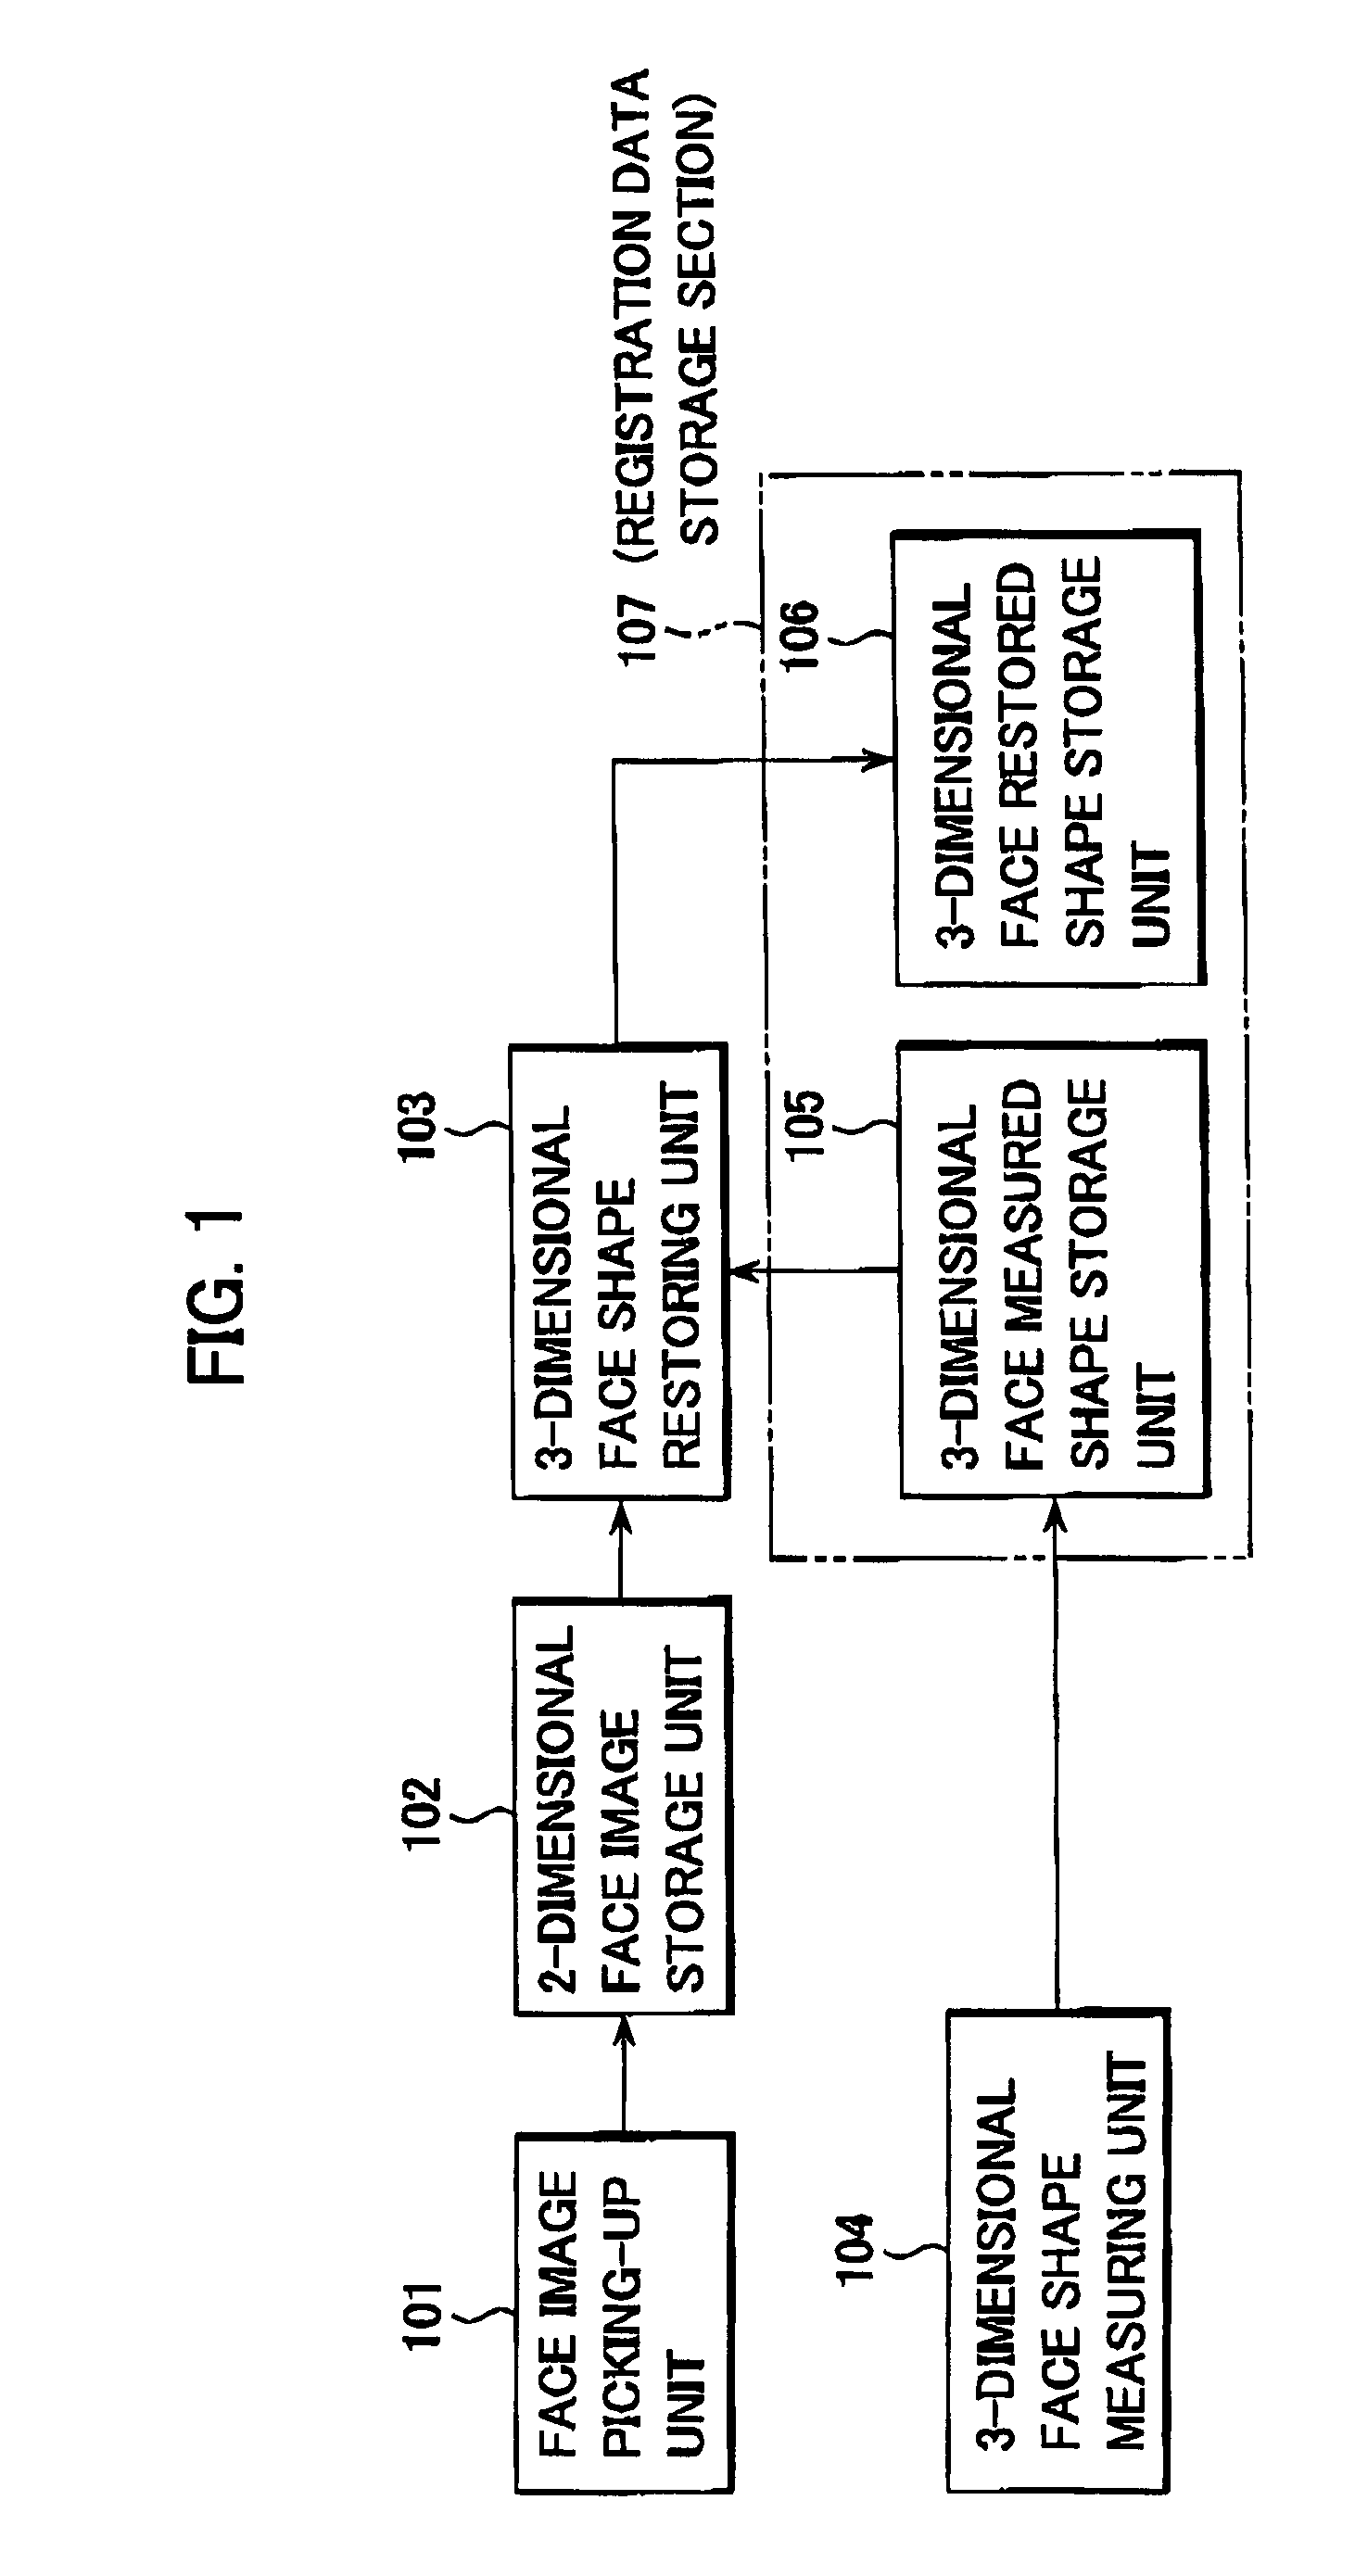 Restoring and collating system and method for 3-dimensional face data